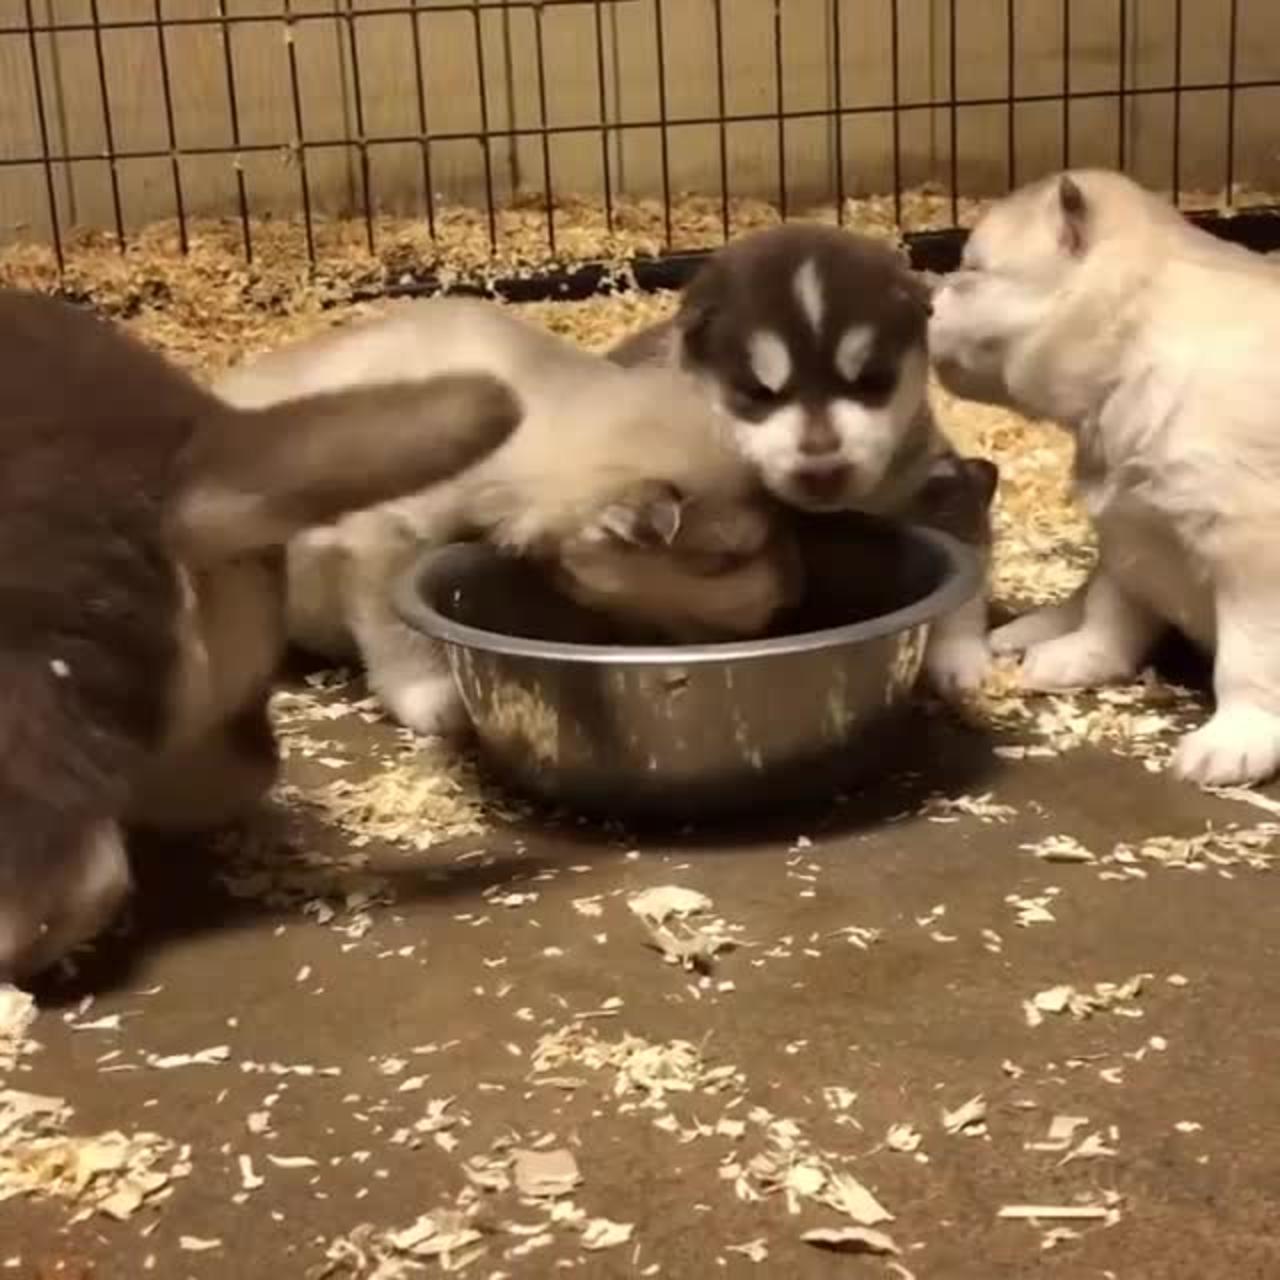 A litter of puppies are eating